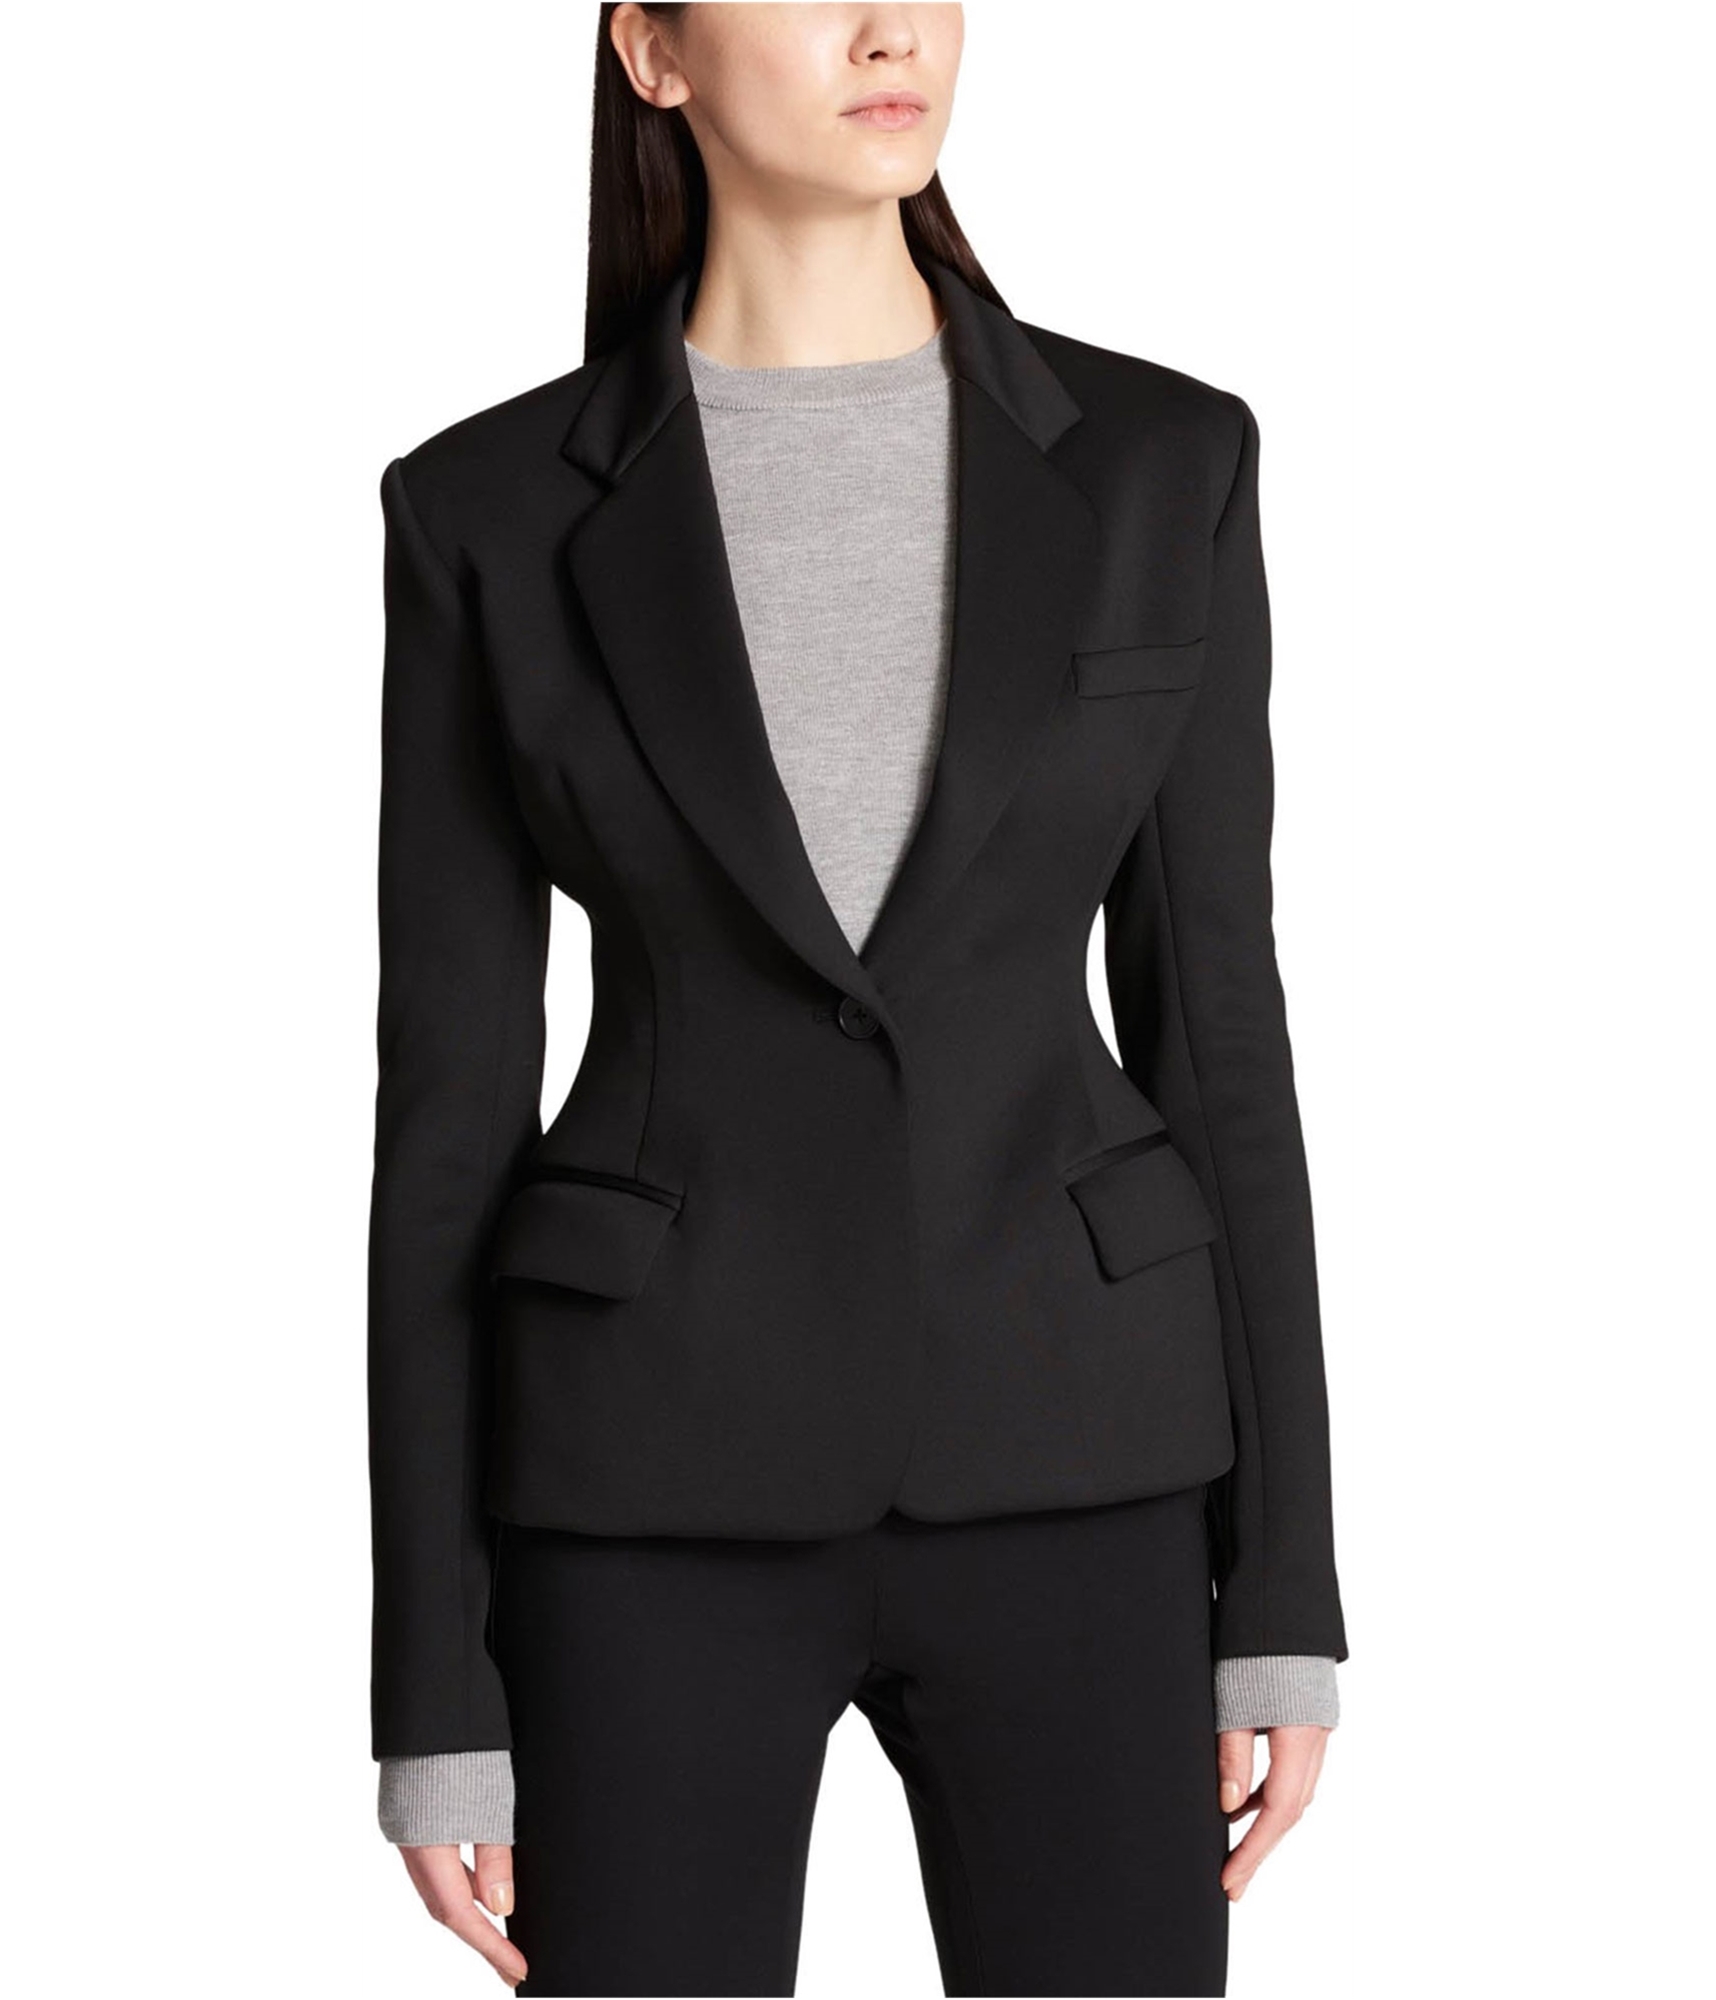 DKNY Womens Exaggerated-Fit One Button Blazer Jacket | Womens Apparel ...